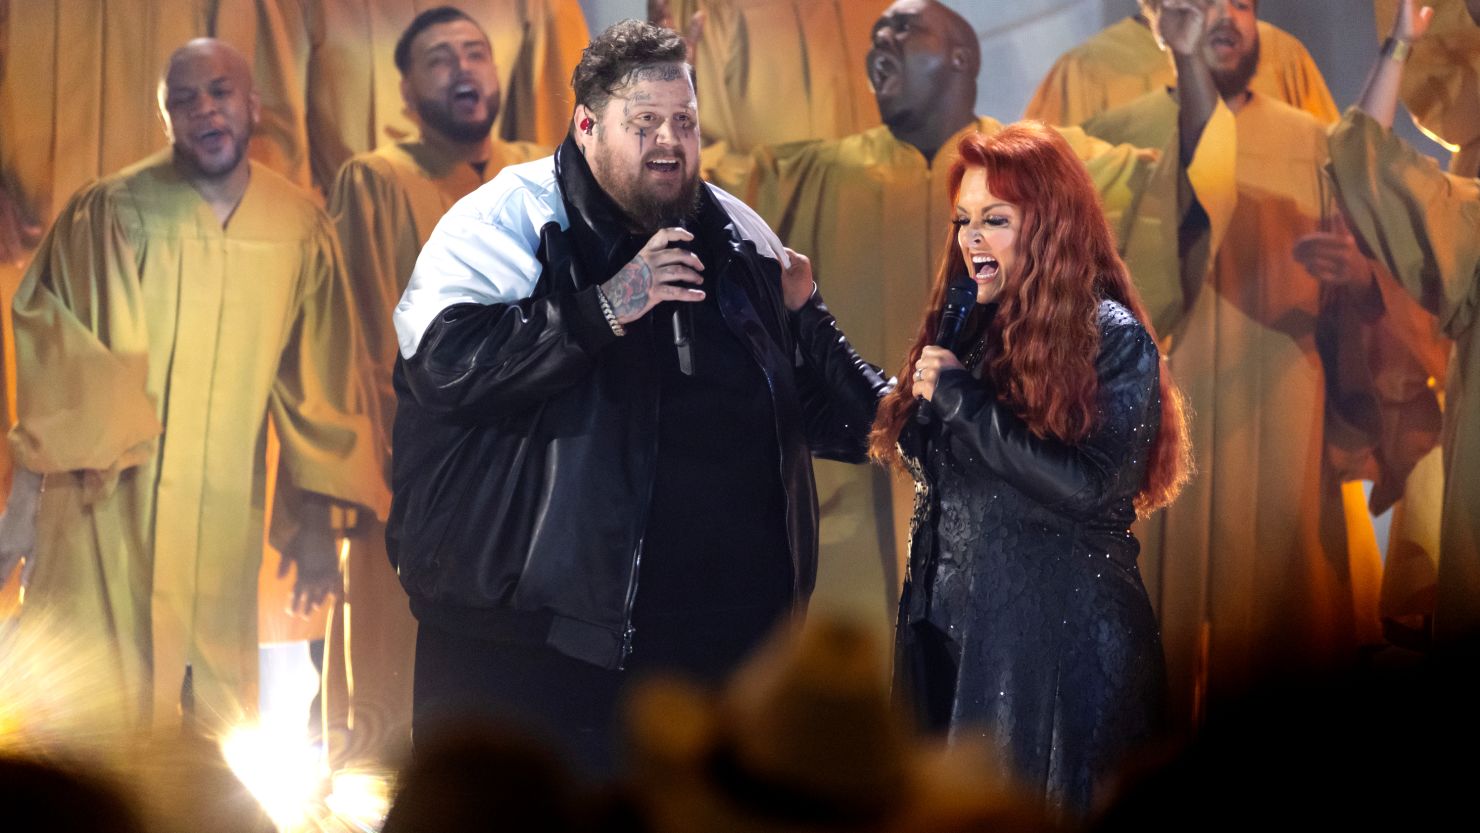 JELLY ROLL, WYNONNA JUDD. THE 57TH ANNUAL CMA AWARDS - "The 57th Annual CMA Awards," Country Music's Biggest Night, hosted by Luke Bryan and Peyton Manning, airs LIVE from Nashville WEDNESDAY, NOV. 8 (8:00-11:00 p.m. EST), on ABC.